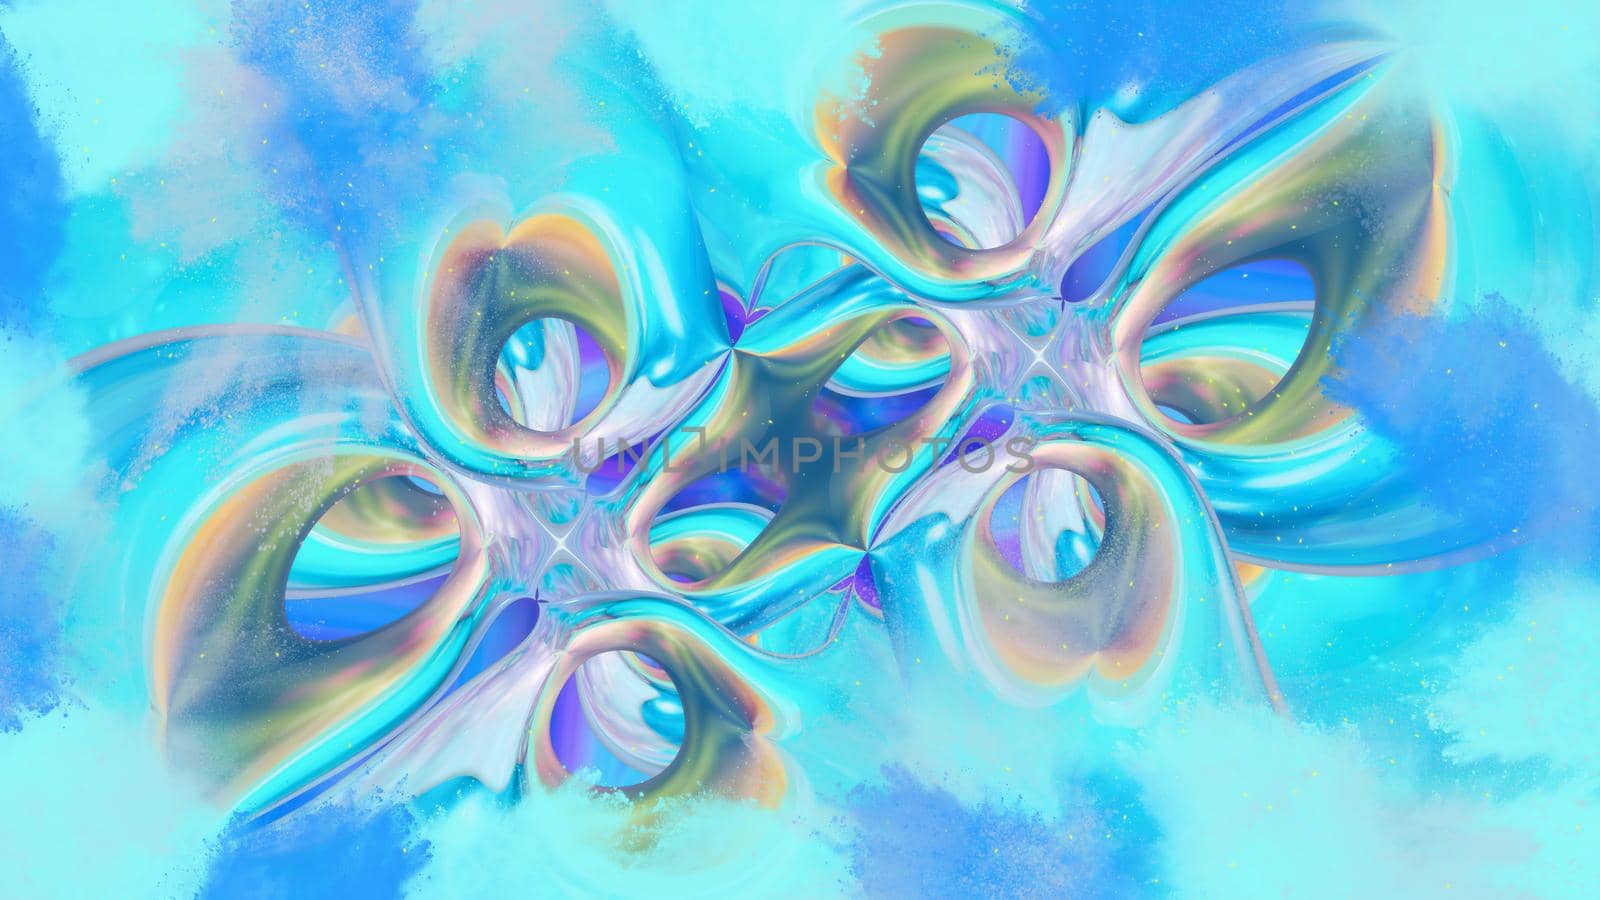 Abstract blue futuristic symmetrical background by Vvicca